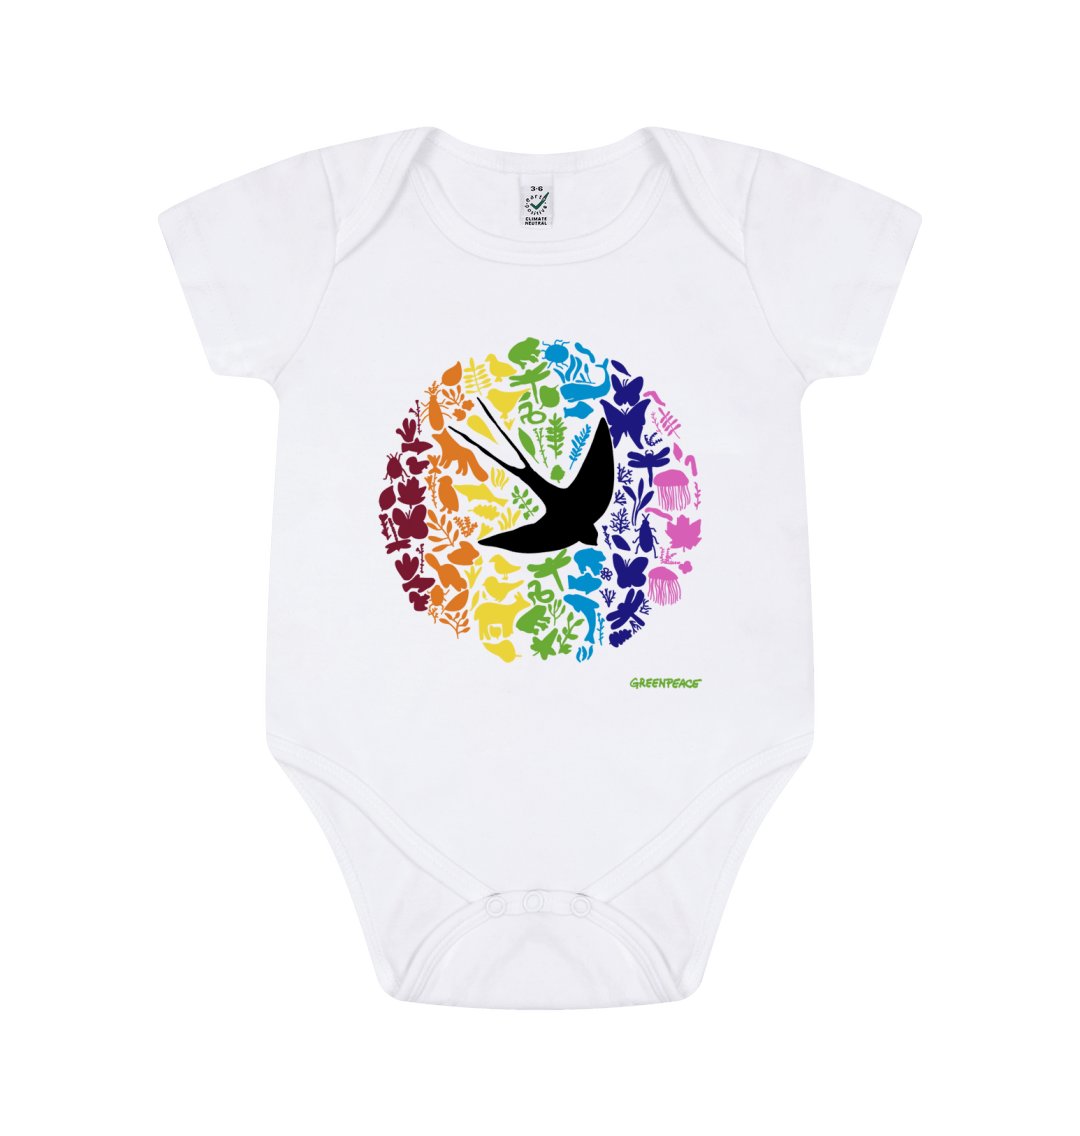 Product show of a baby grow with a rainbow pattern of plants and animals